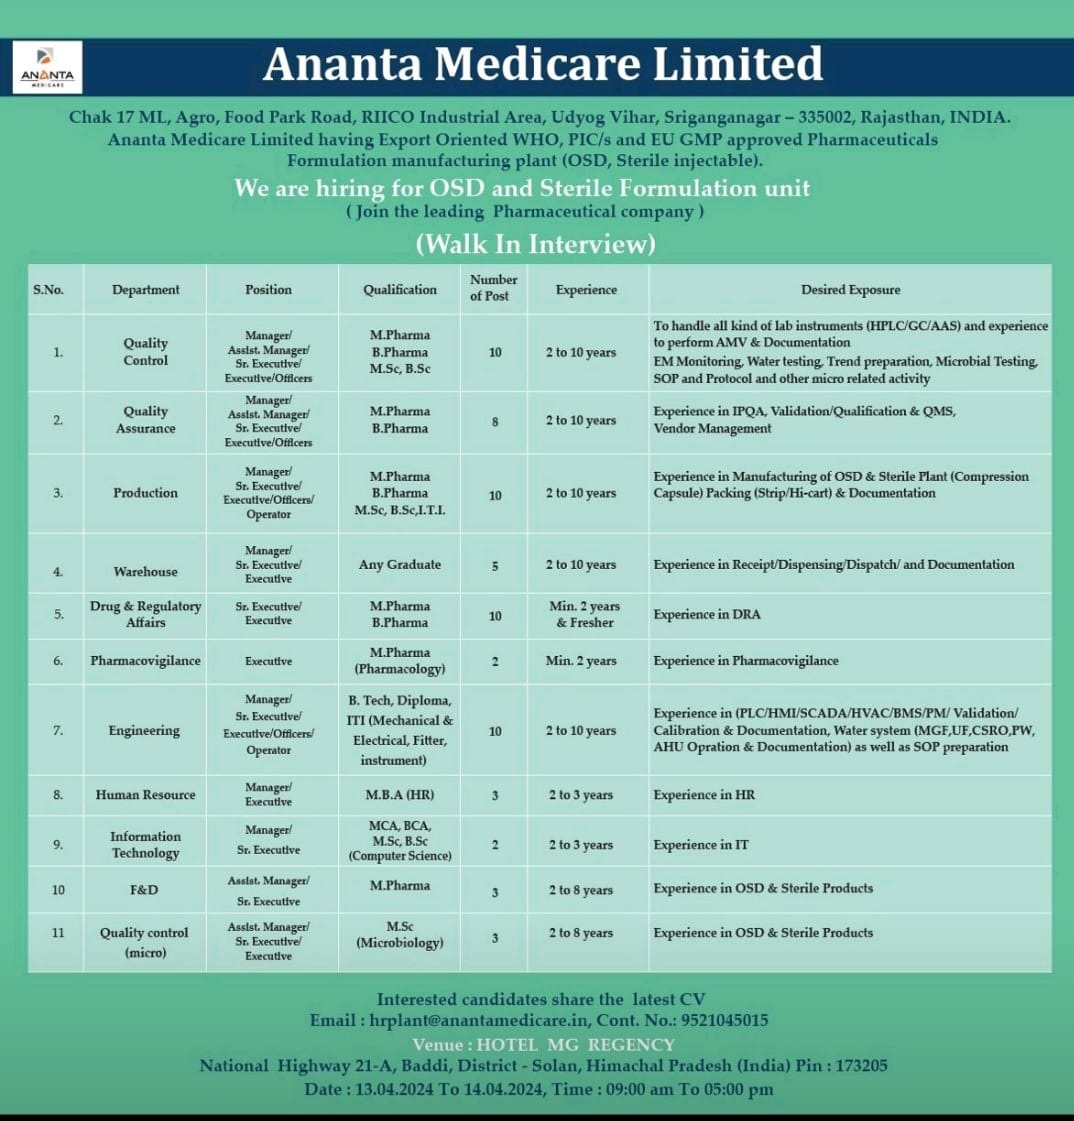 Ananta Medicare Limited-Interview